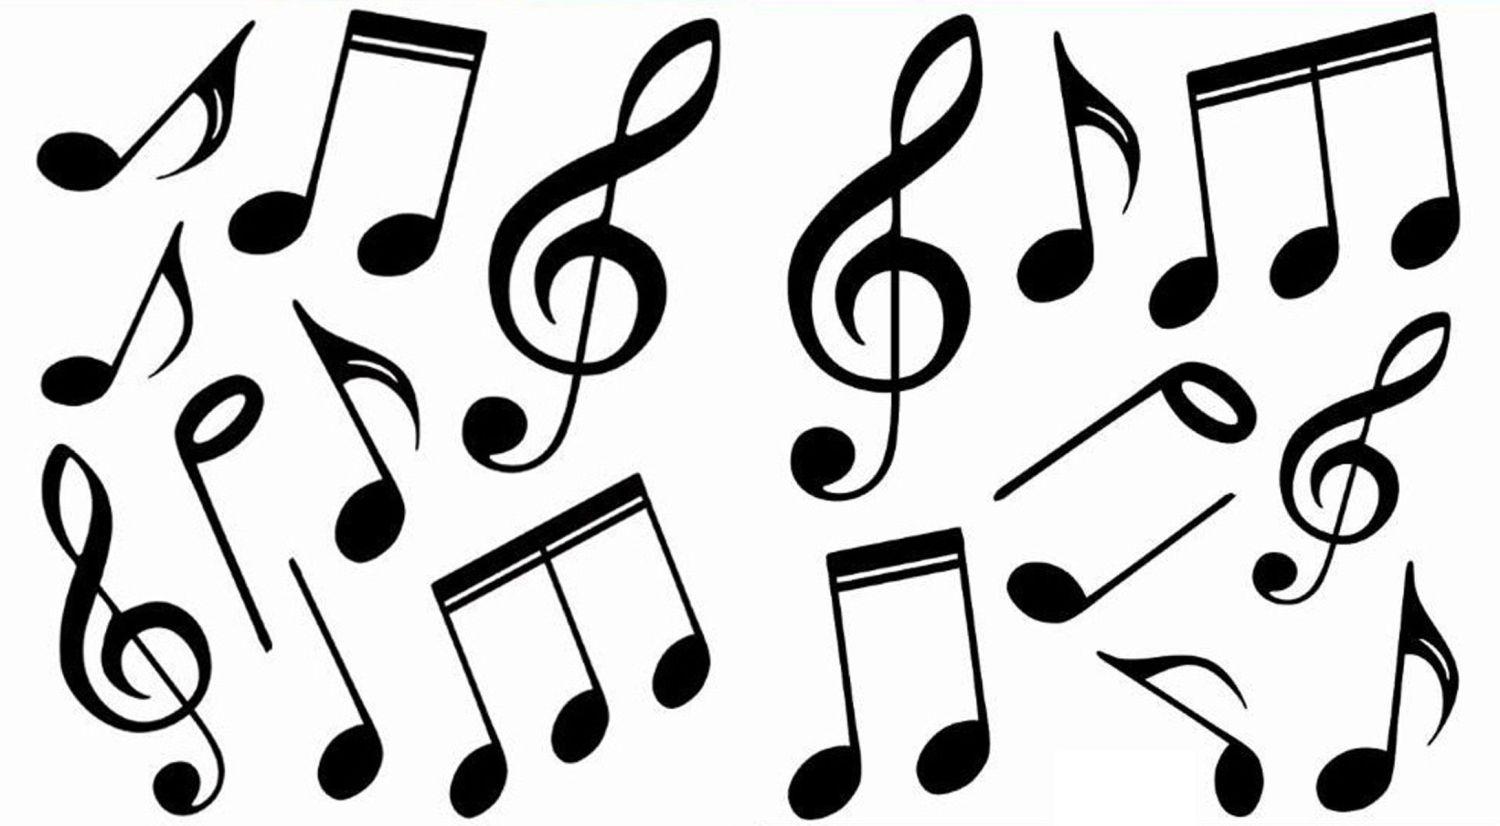 Free Picture Of Music Notes And Symbols, Download Free Clip Art